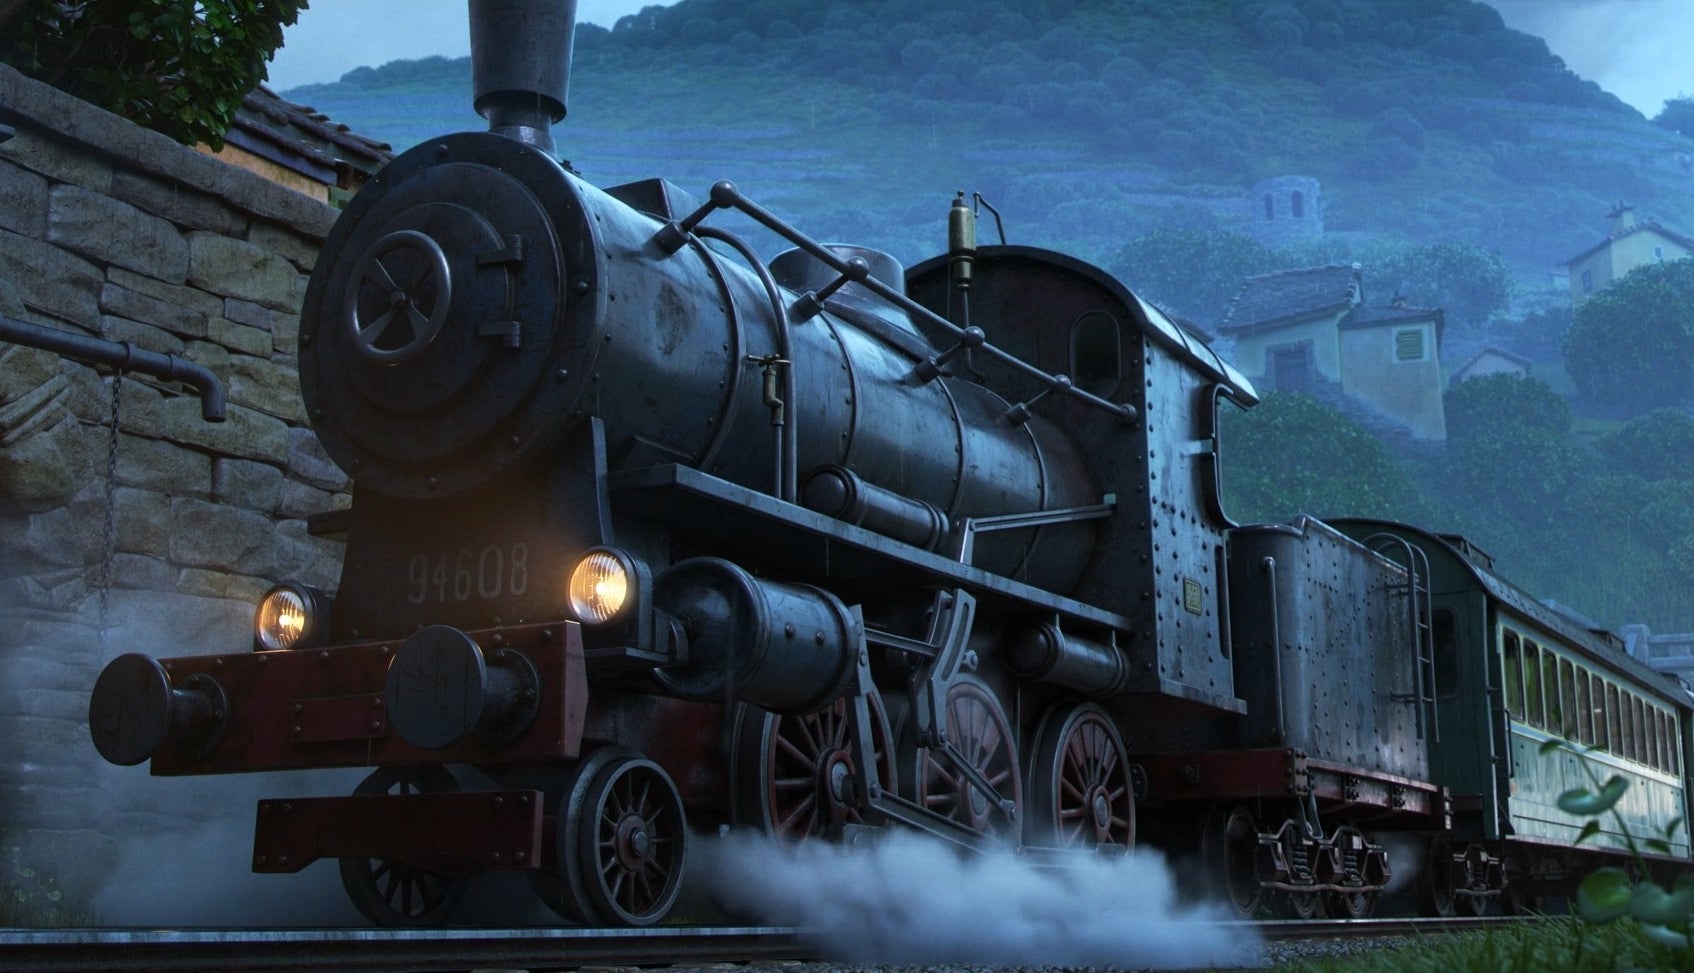 A steam engine standing at a station.